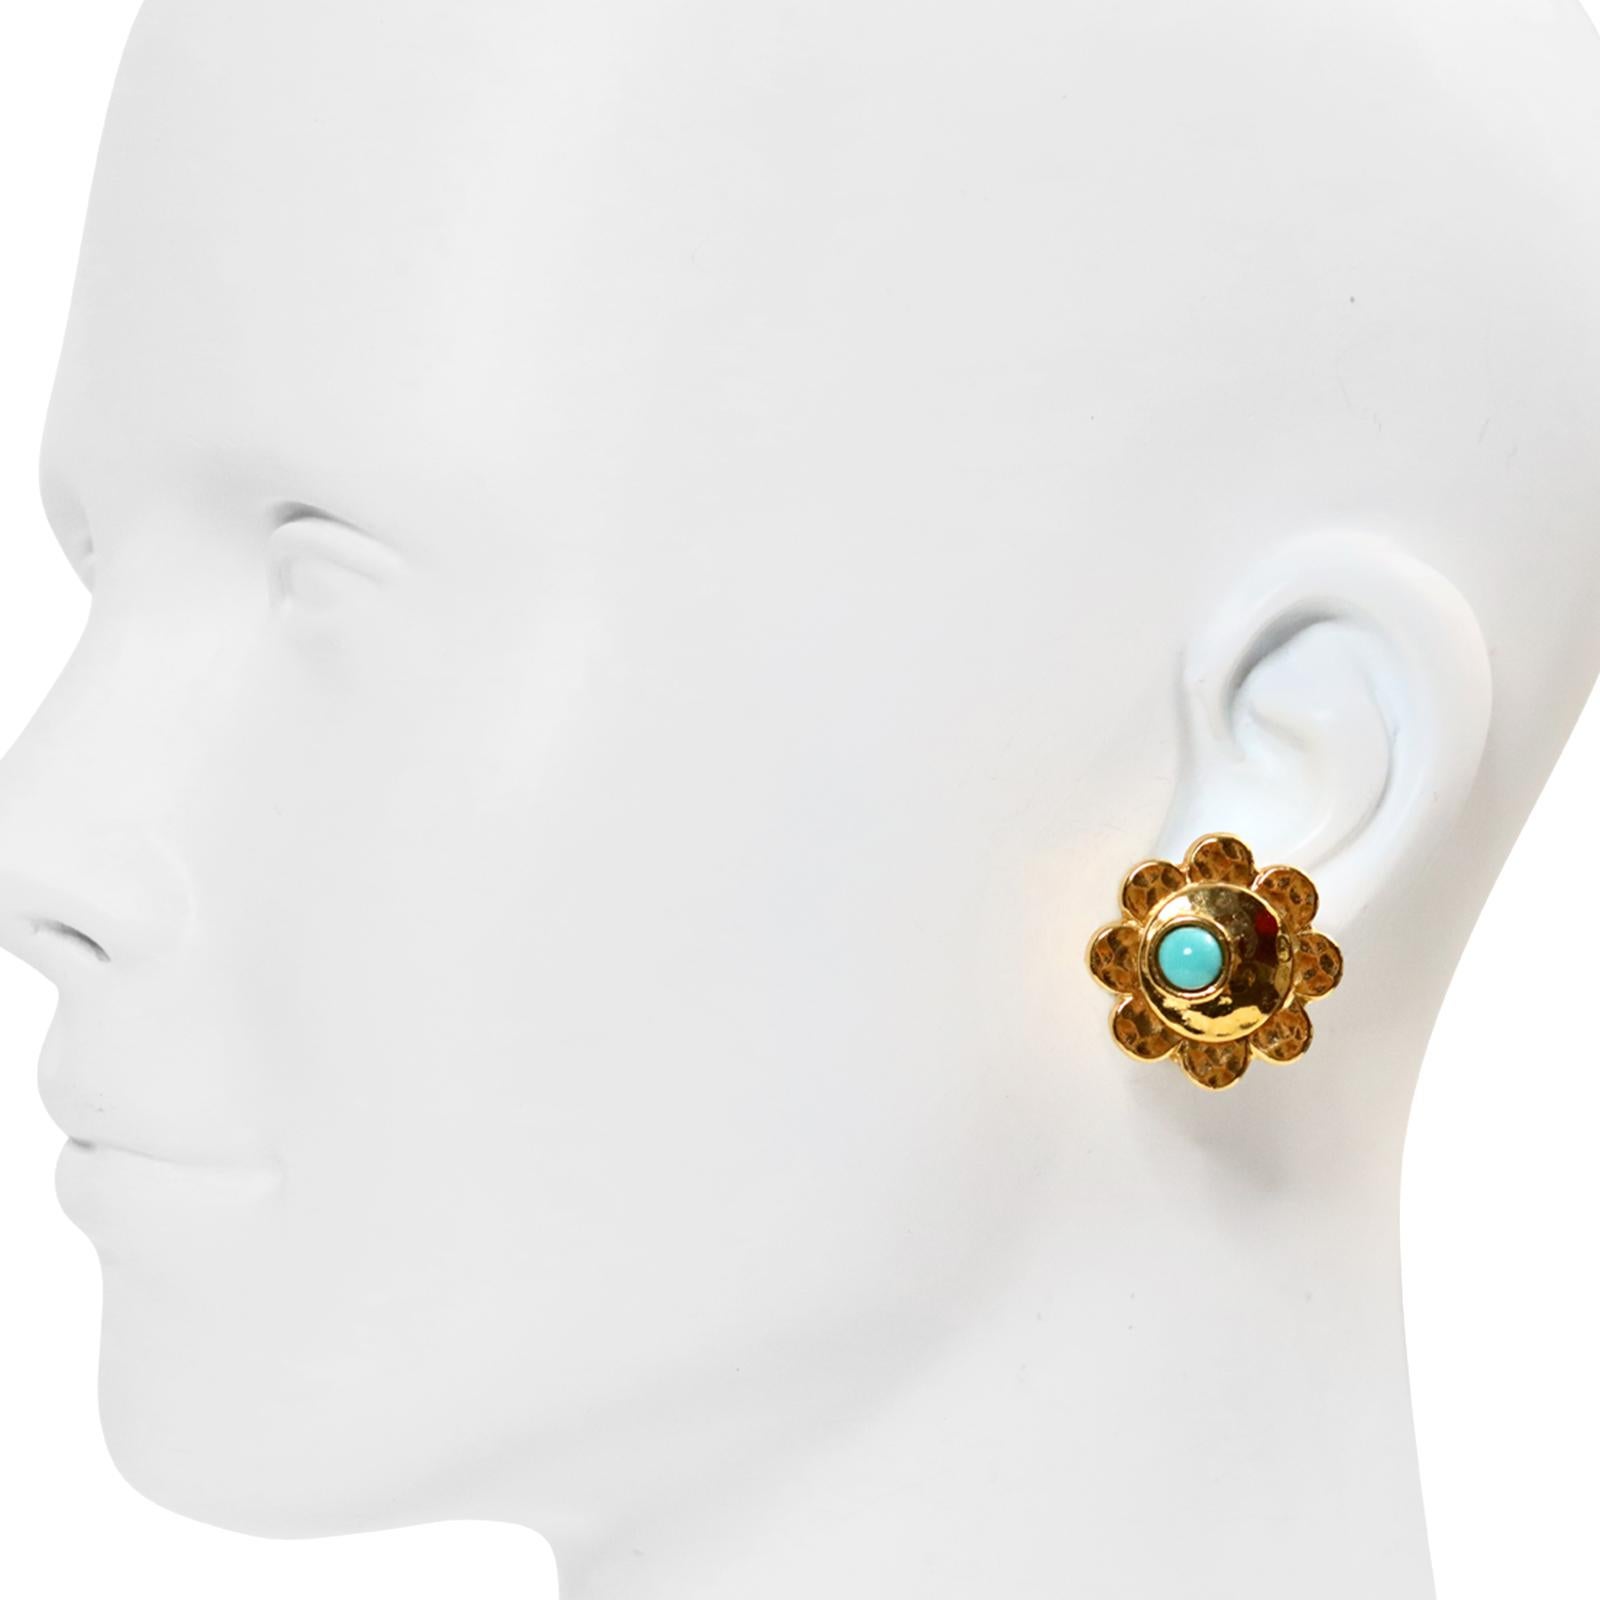 Vintage Carita Paris Gold with Faux Turquoise Earrings, Circa 1980s For Sale 2